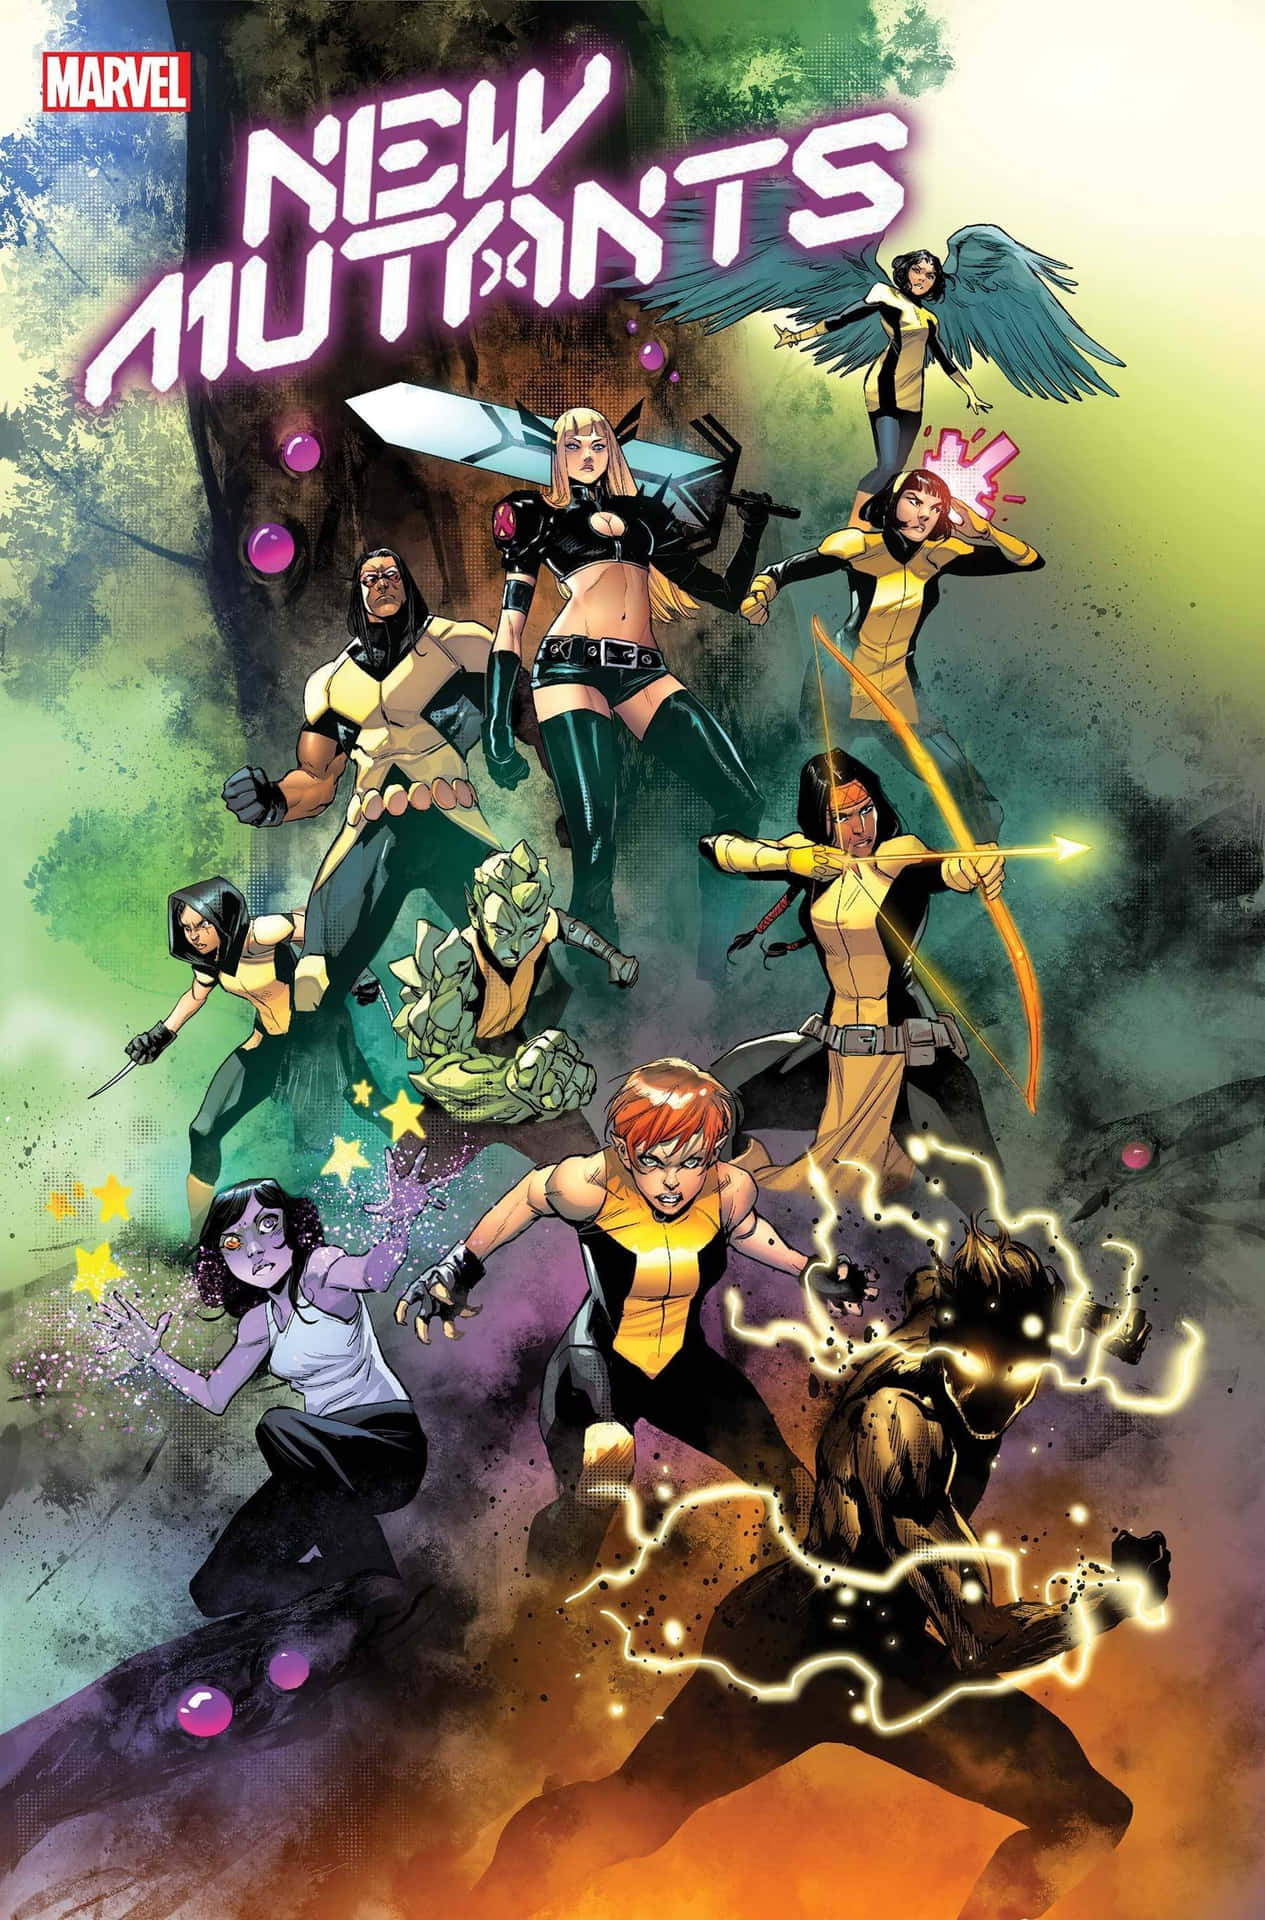 The New Mutants group in action Wallpaper